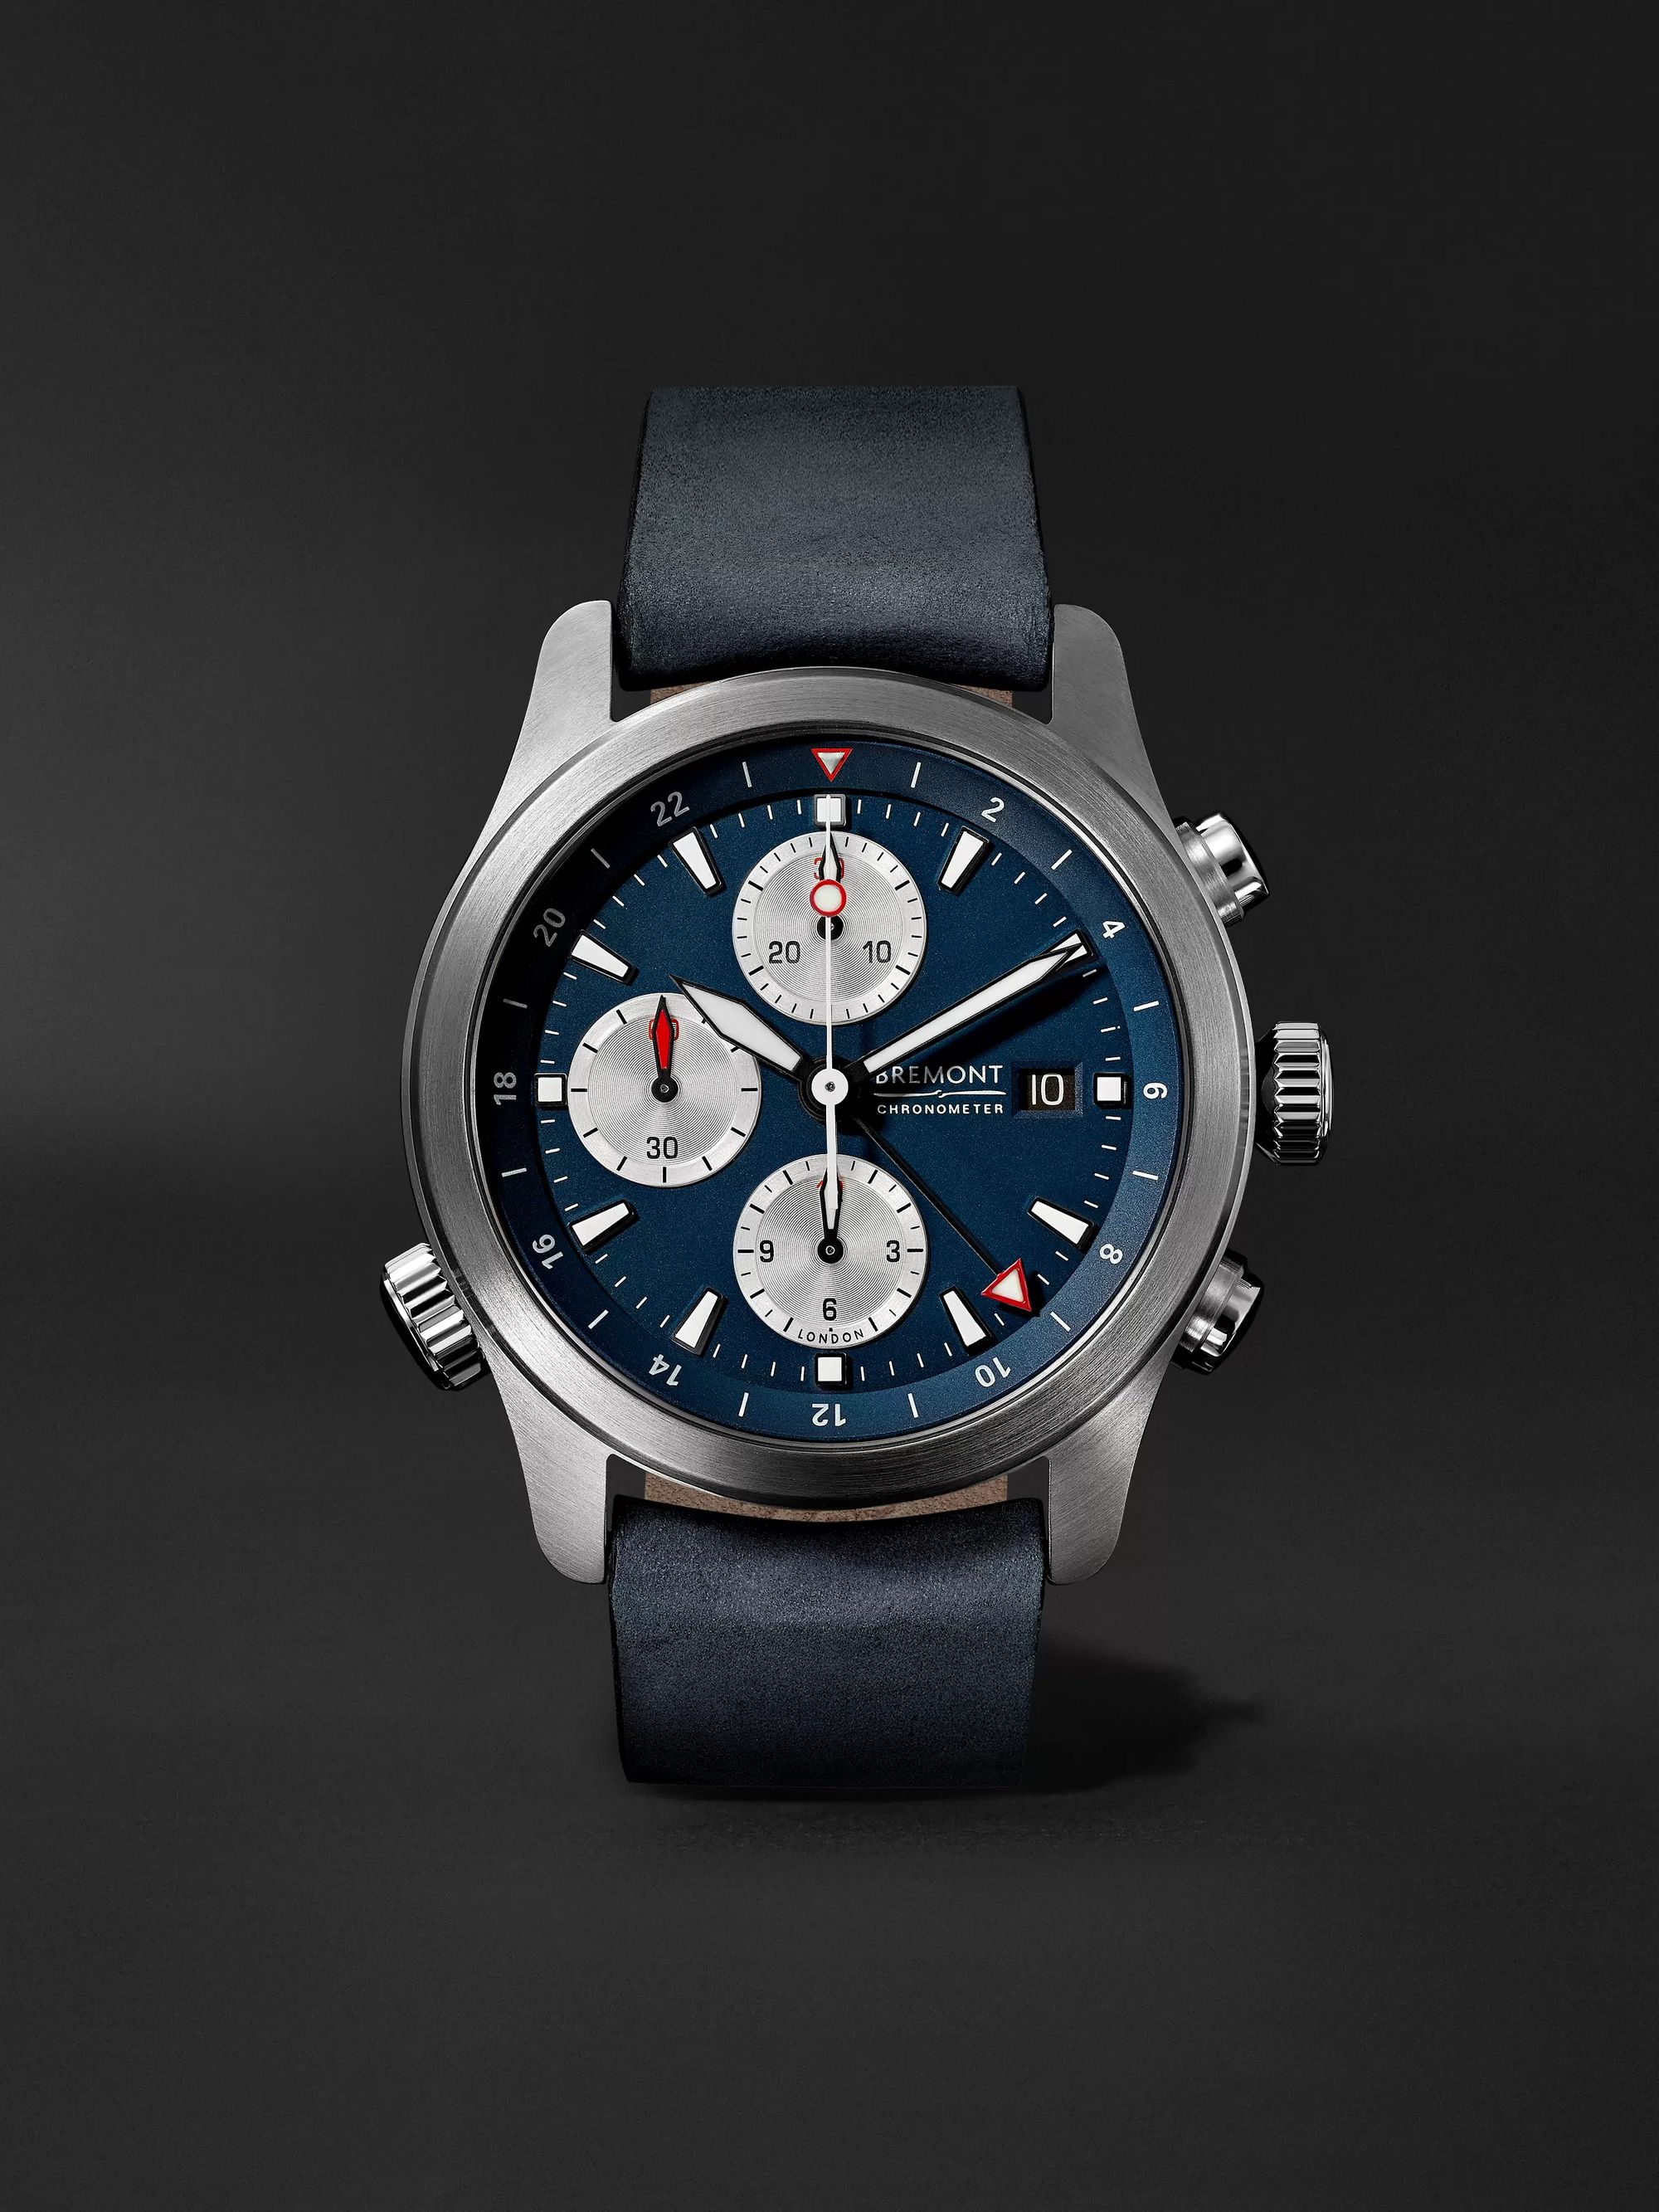 BREMONT Limited Edition Automatic GMT Chronograph 43mm Stainless Steel and Leather Watch, Ref. No. ALT1-ZT-BL-R-S